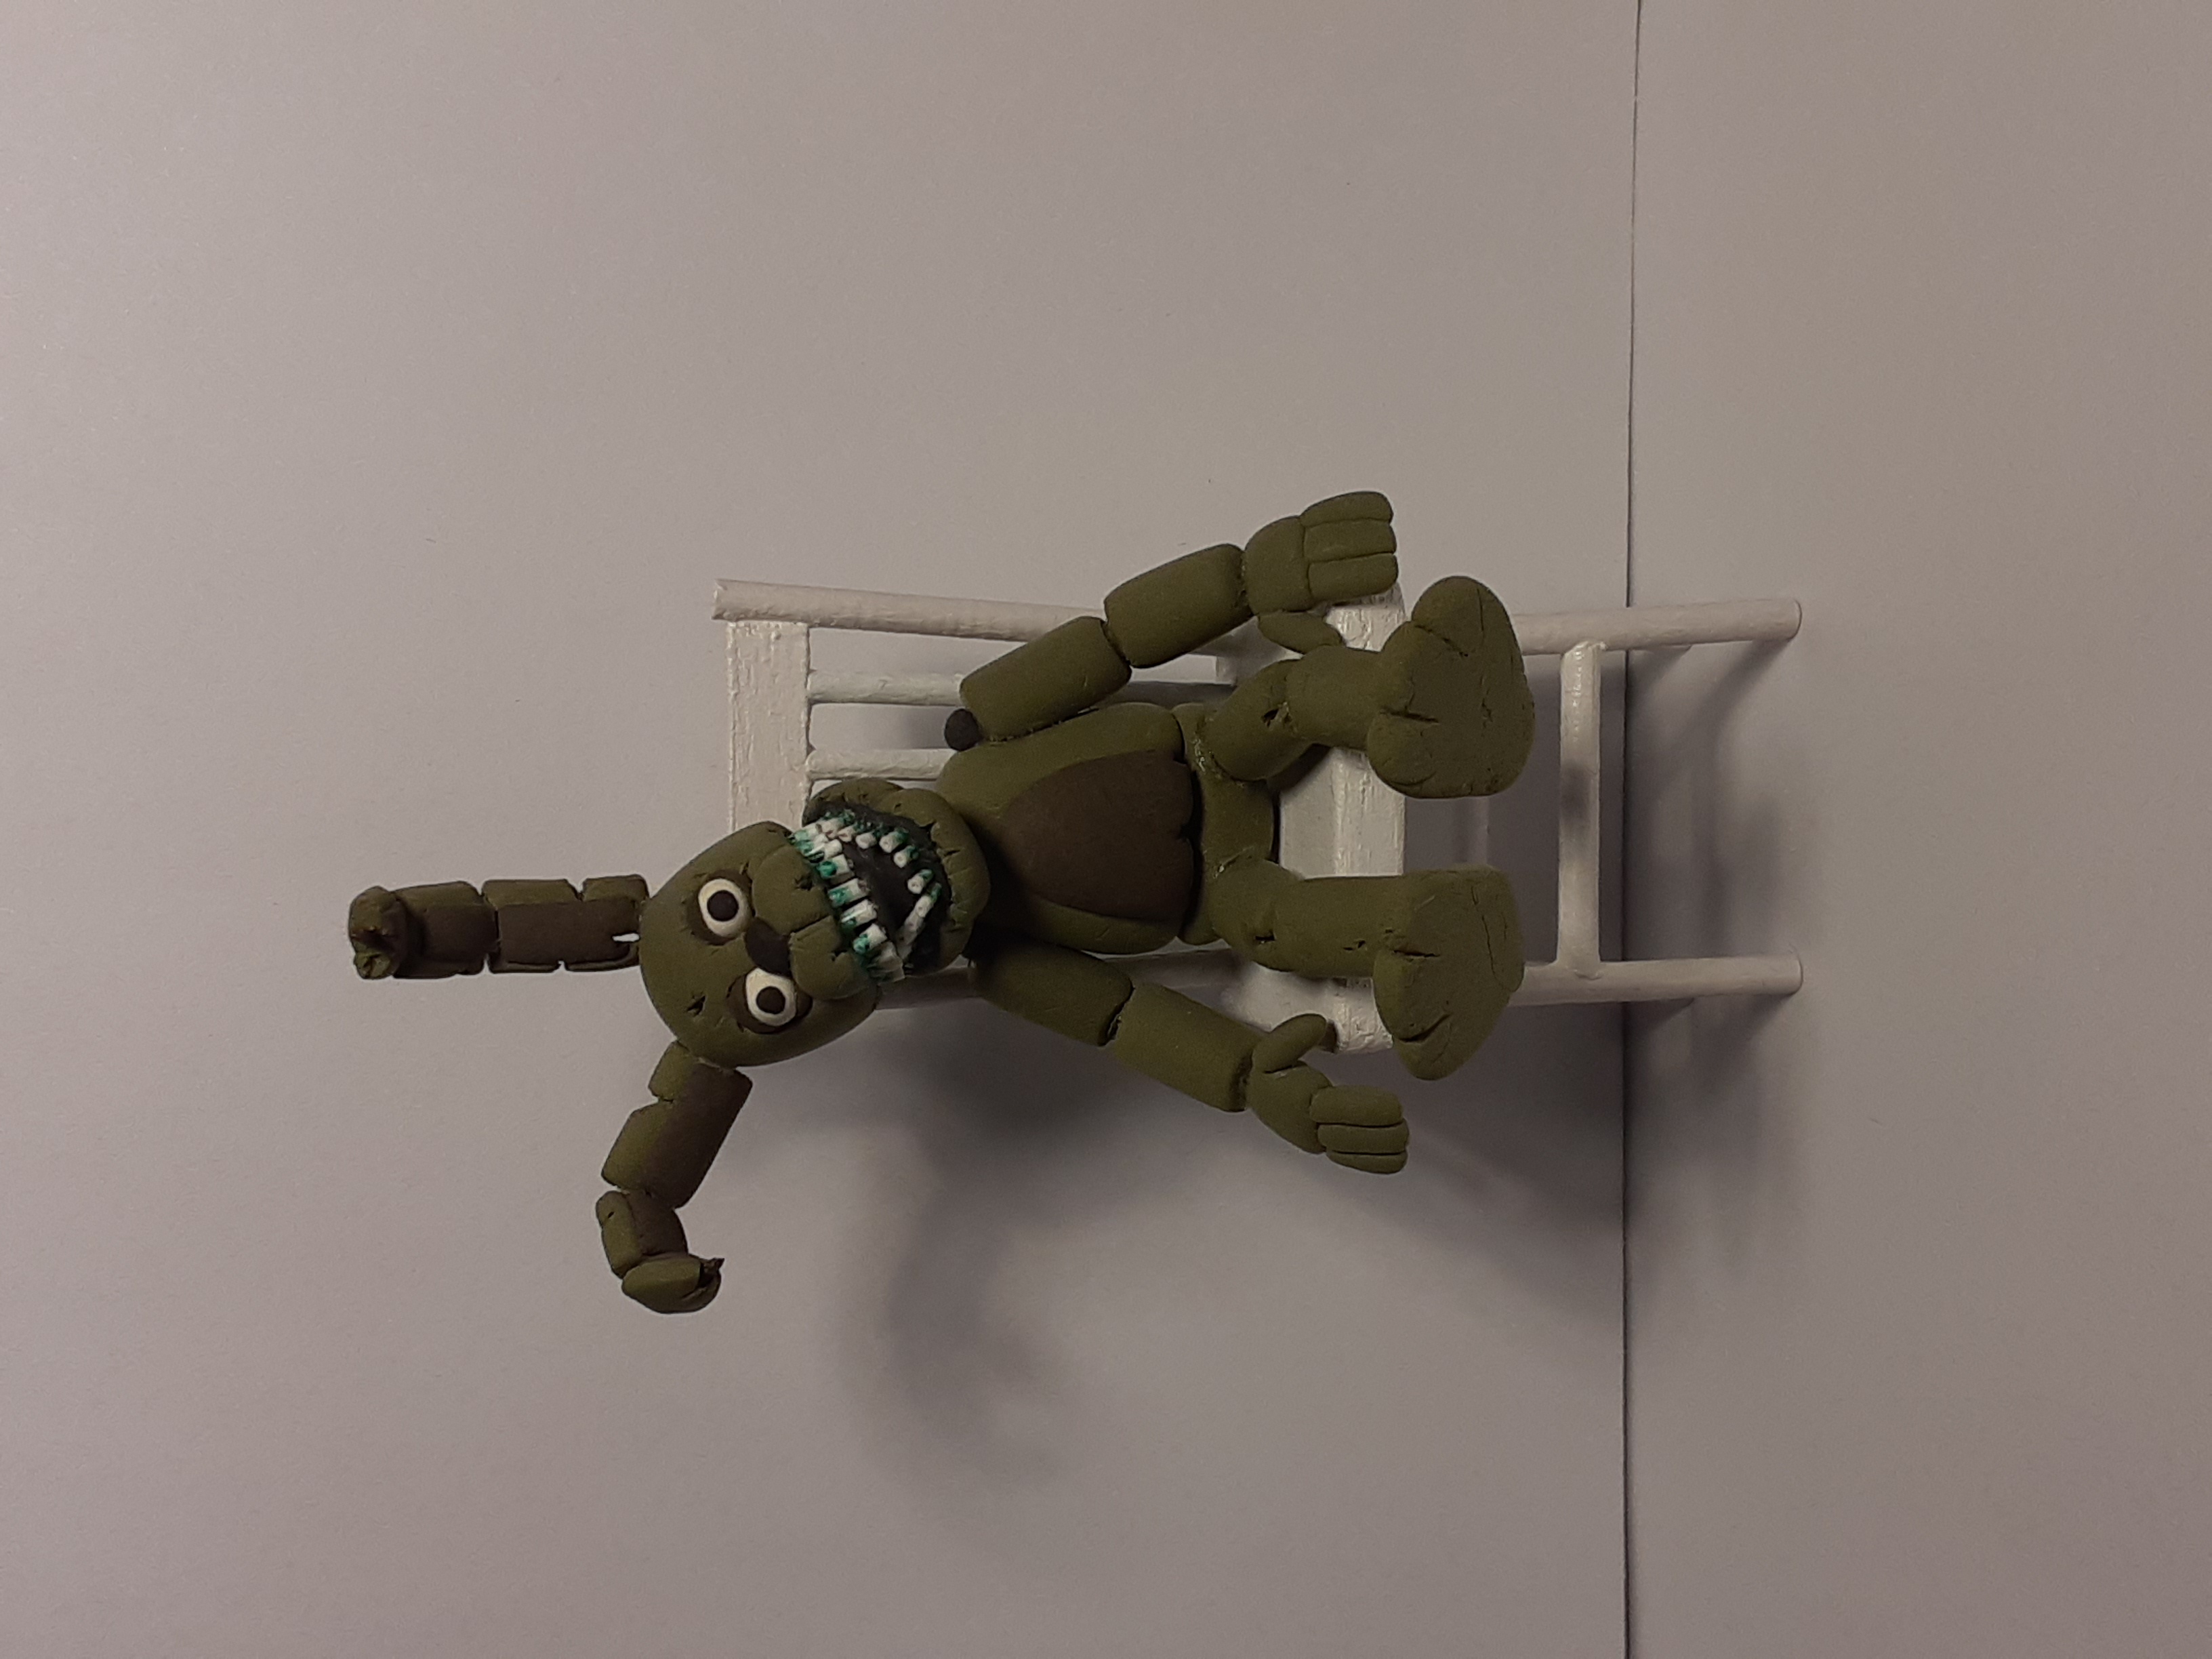 five nights at freddy's 4 Plush Trap Papercraft by Adogopaper on DeviantArt